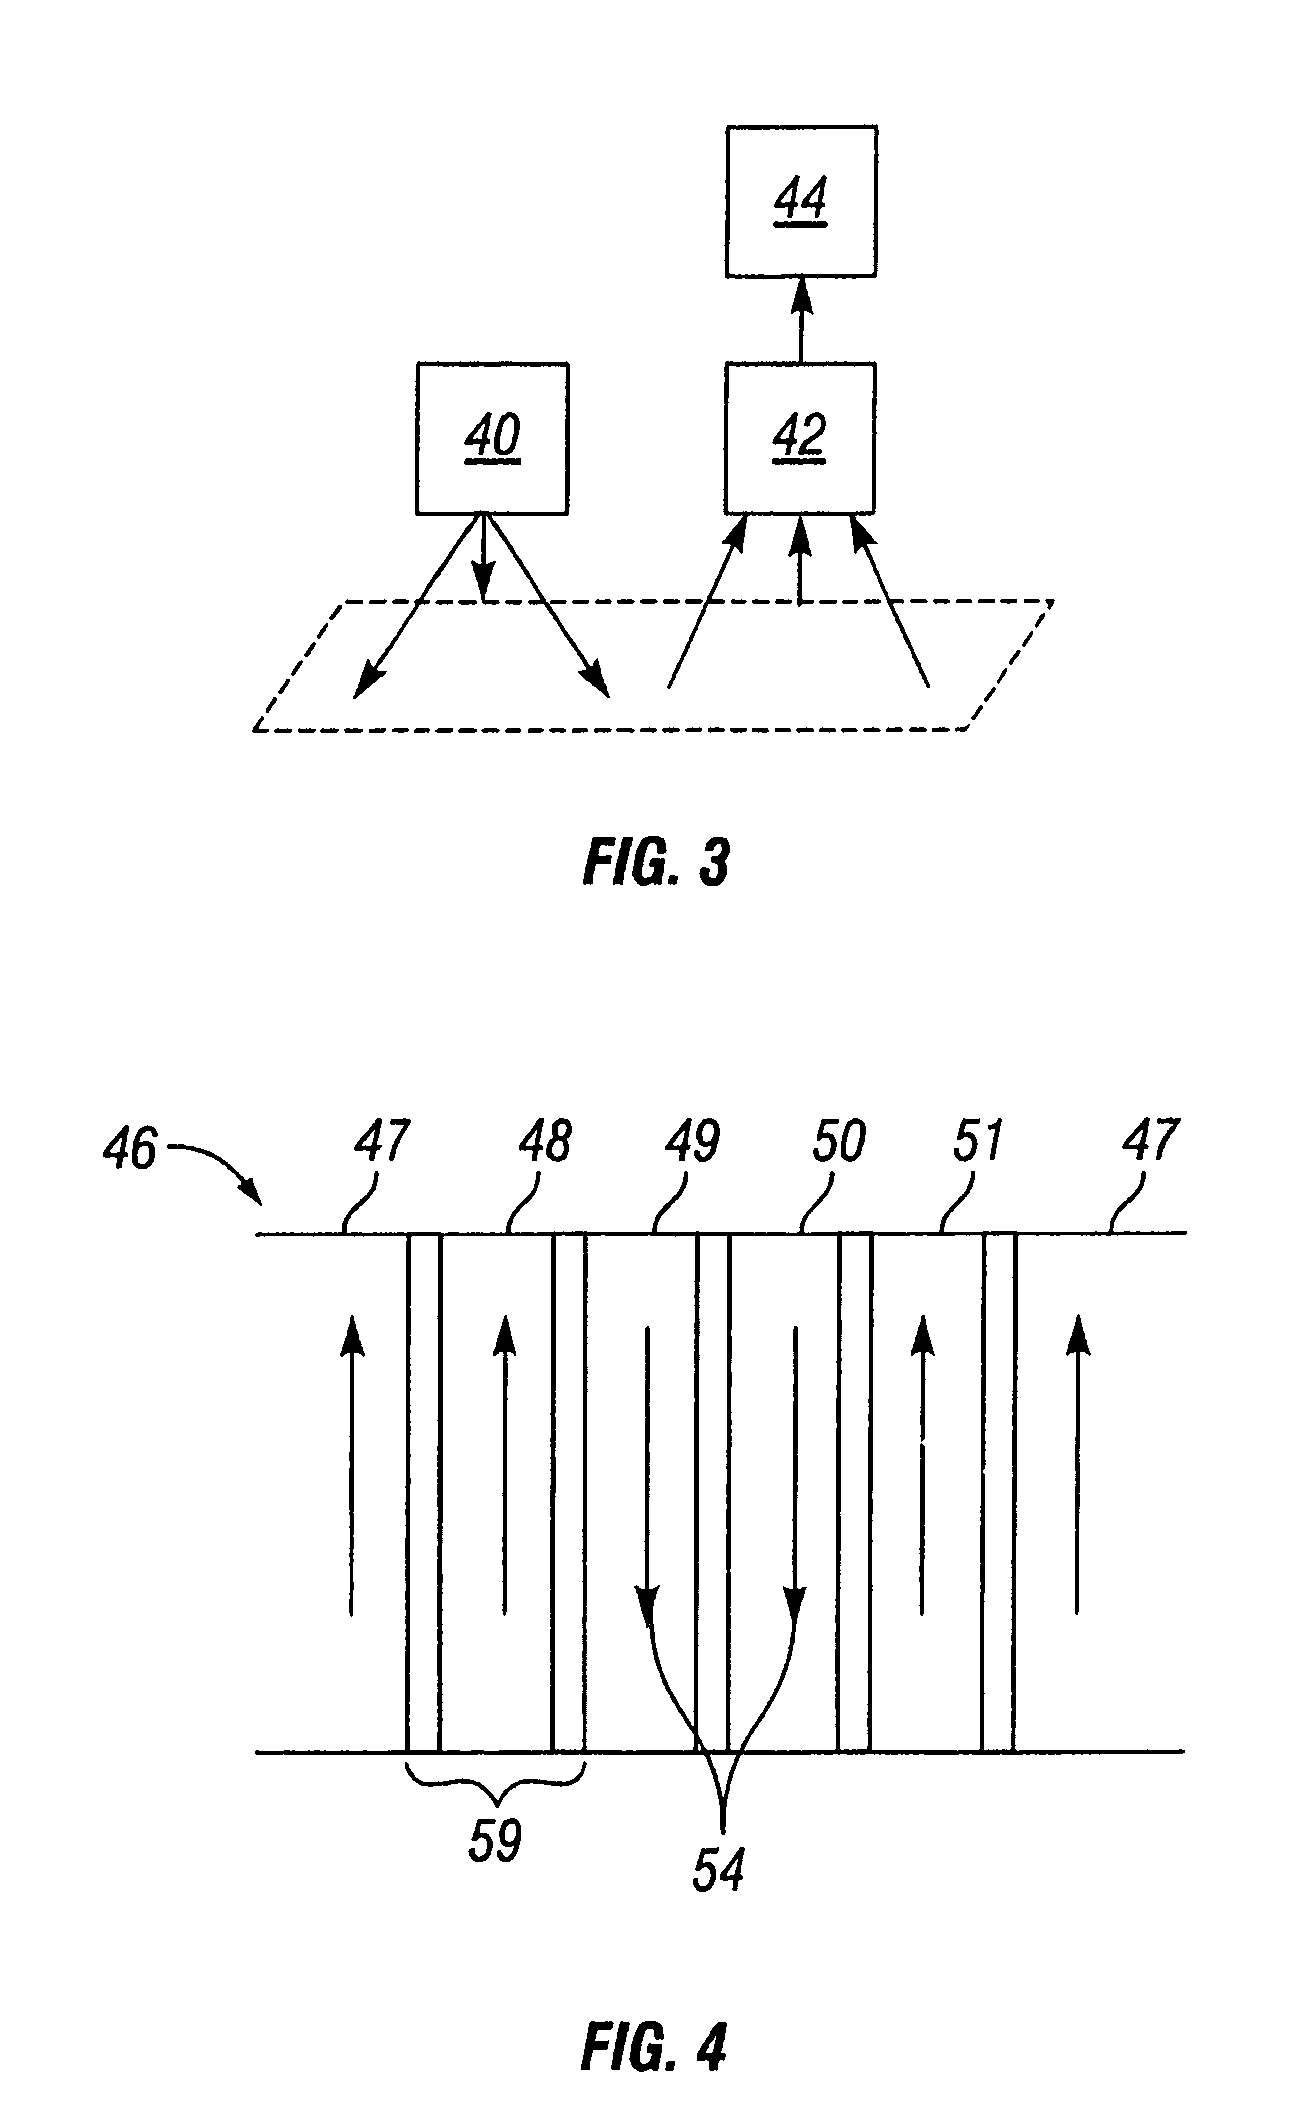 Method of using a self-locking travel pattern to achieve calibration of remote sensors using conventionally collected data